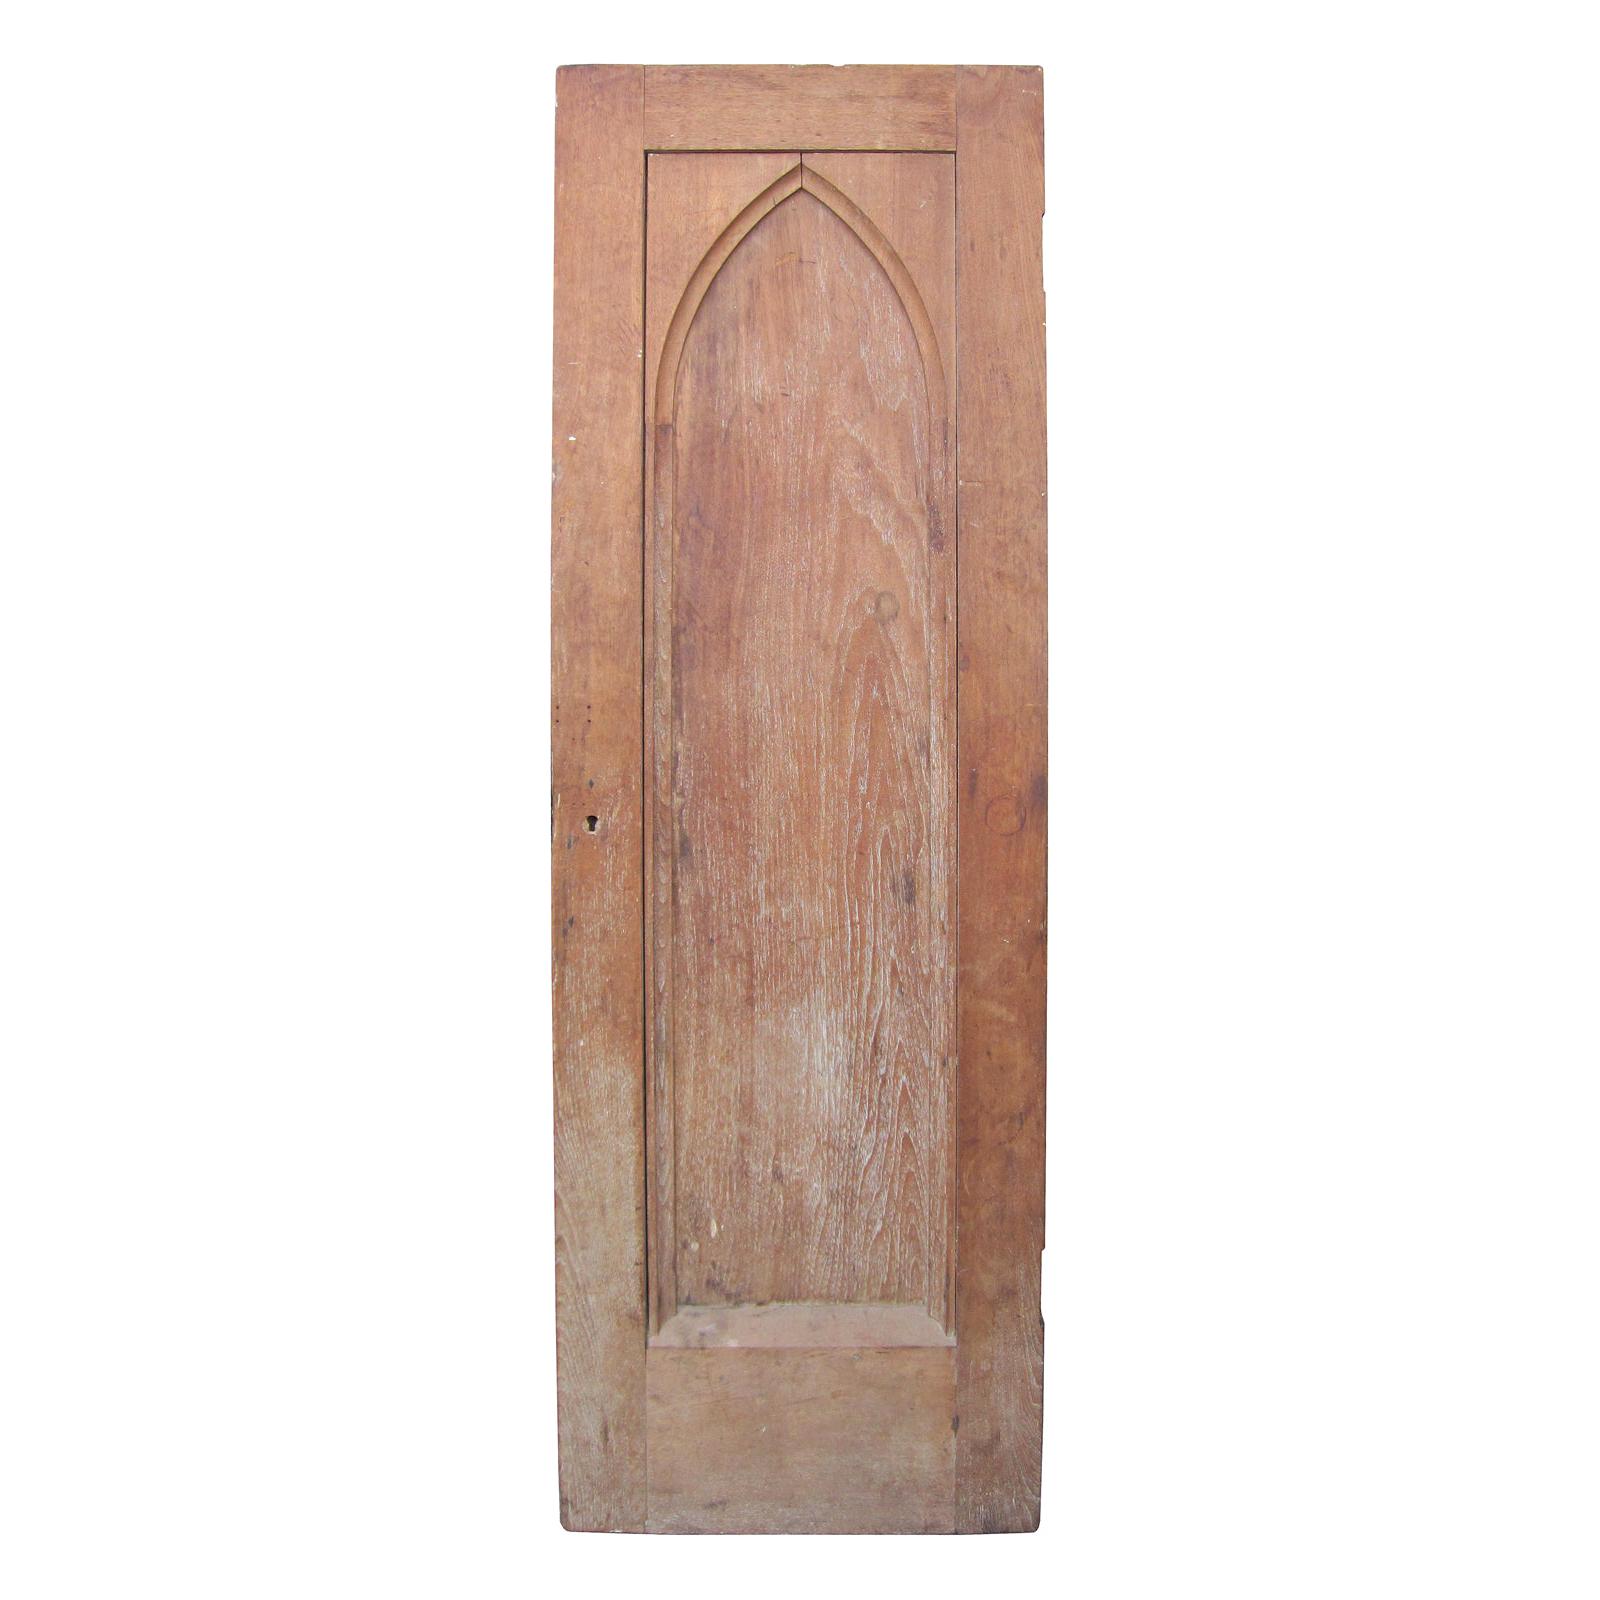 19th-20th Century Wood Door with Gothic Arch